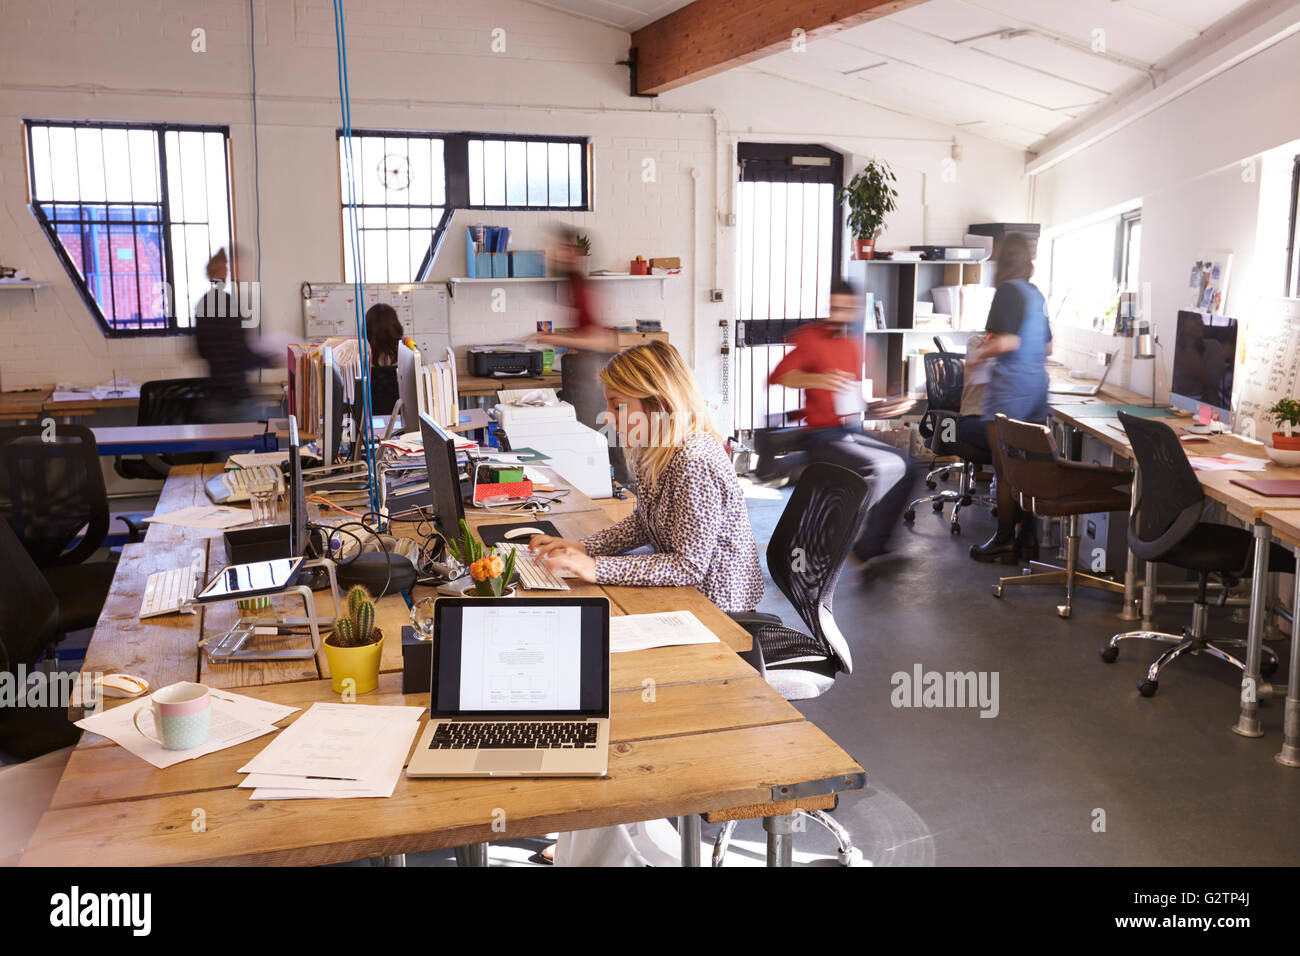 Interior Of Busy Design Office With Staff Stock Photo